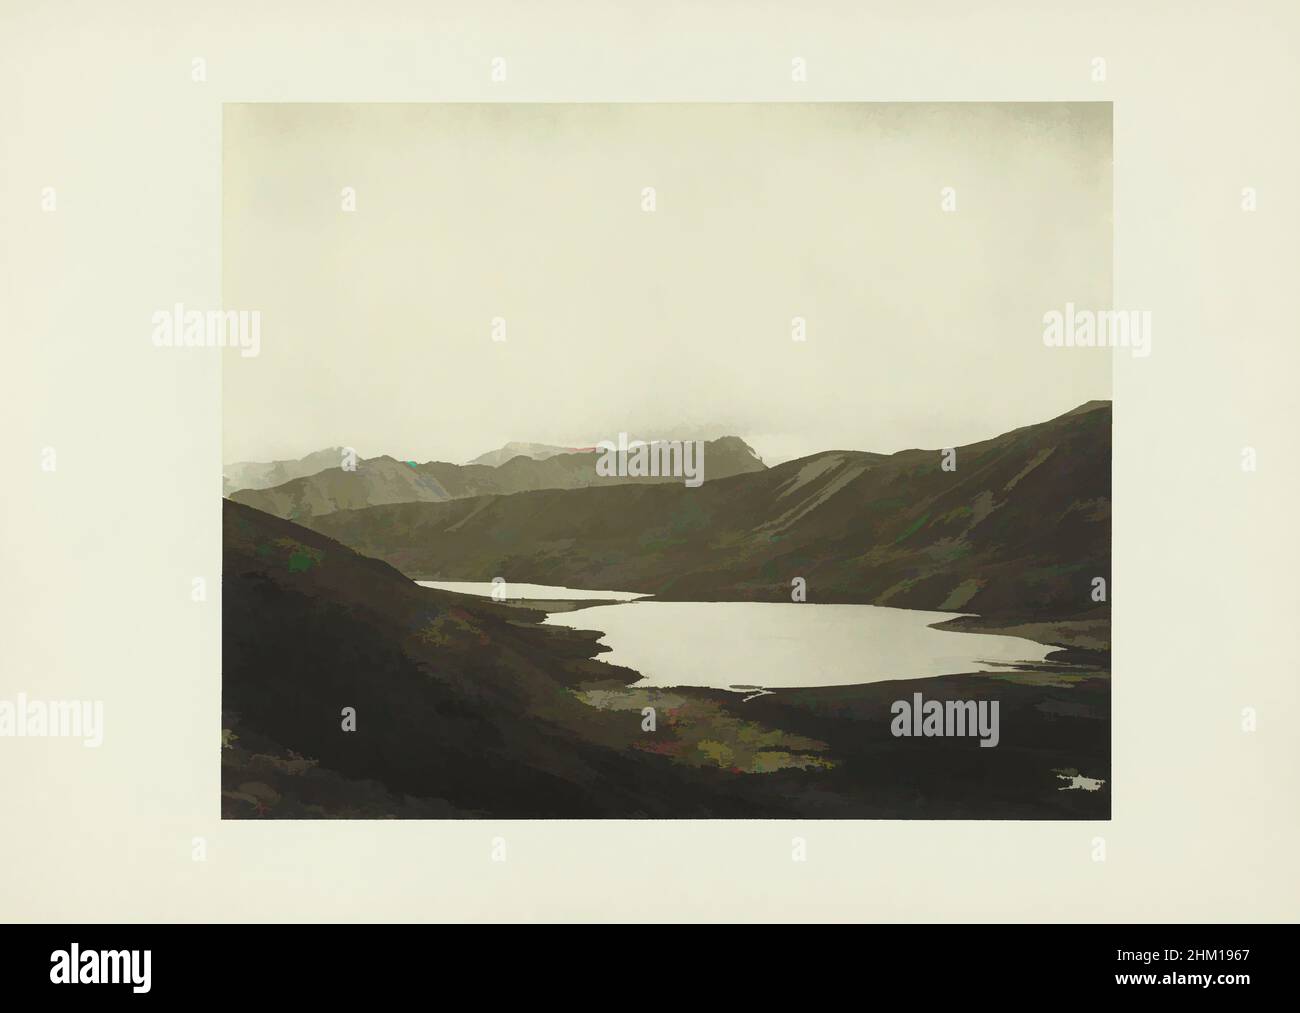 Art inspired by View of Lake Tsomgo in the Himalayas, India, The Tshogna, John Claude White, Sikkim, 1903 - 1904, paper, cardboard, albumen print, height 230 mm × width 286 mmheight 315 mm × width 438 mm, Classic works modernized by Artotop with a splash of modernity. Shapes, color and value, eye-catching visual impact on art. Emotions through freedom of artworks in a contemporary way. A timeless message pursuing a wildly creative new direction. Artists turning to the digital medium and creating the Artotop NFT Stock Photo